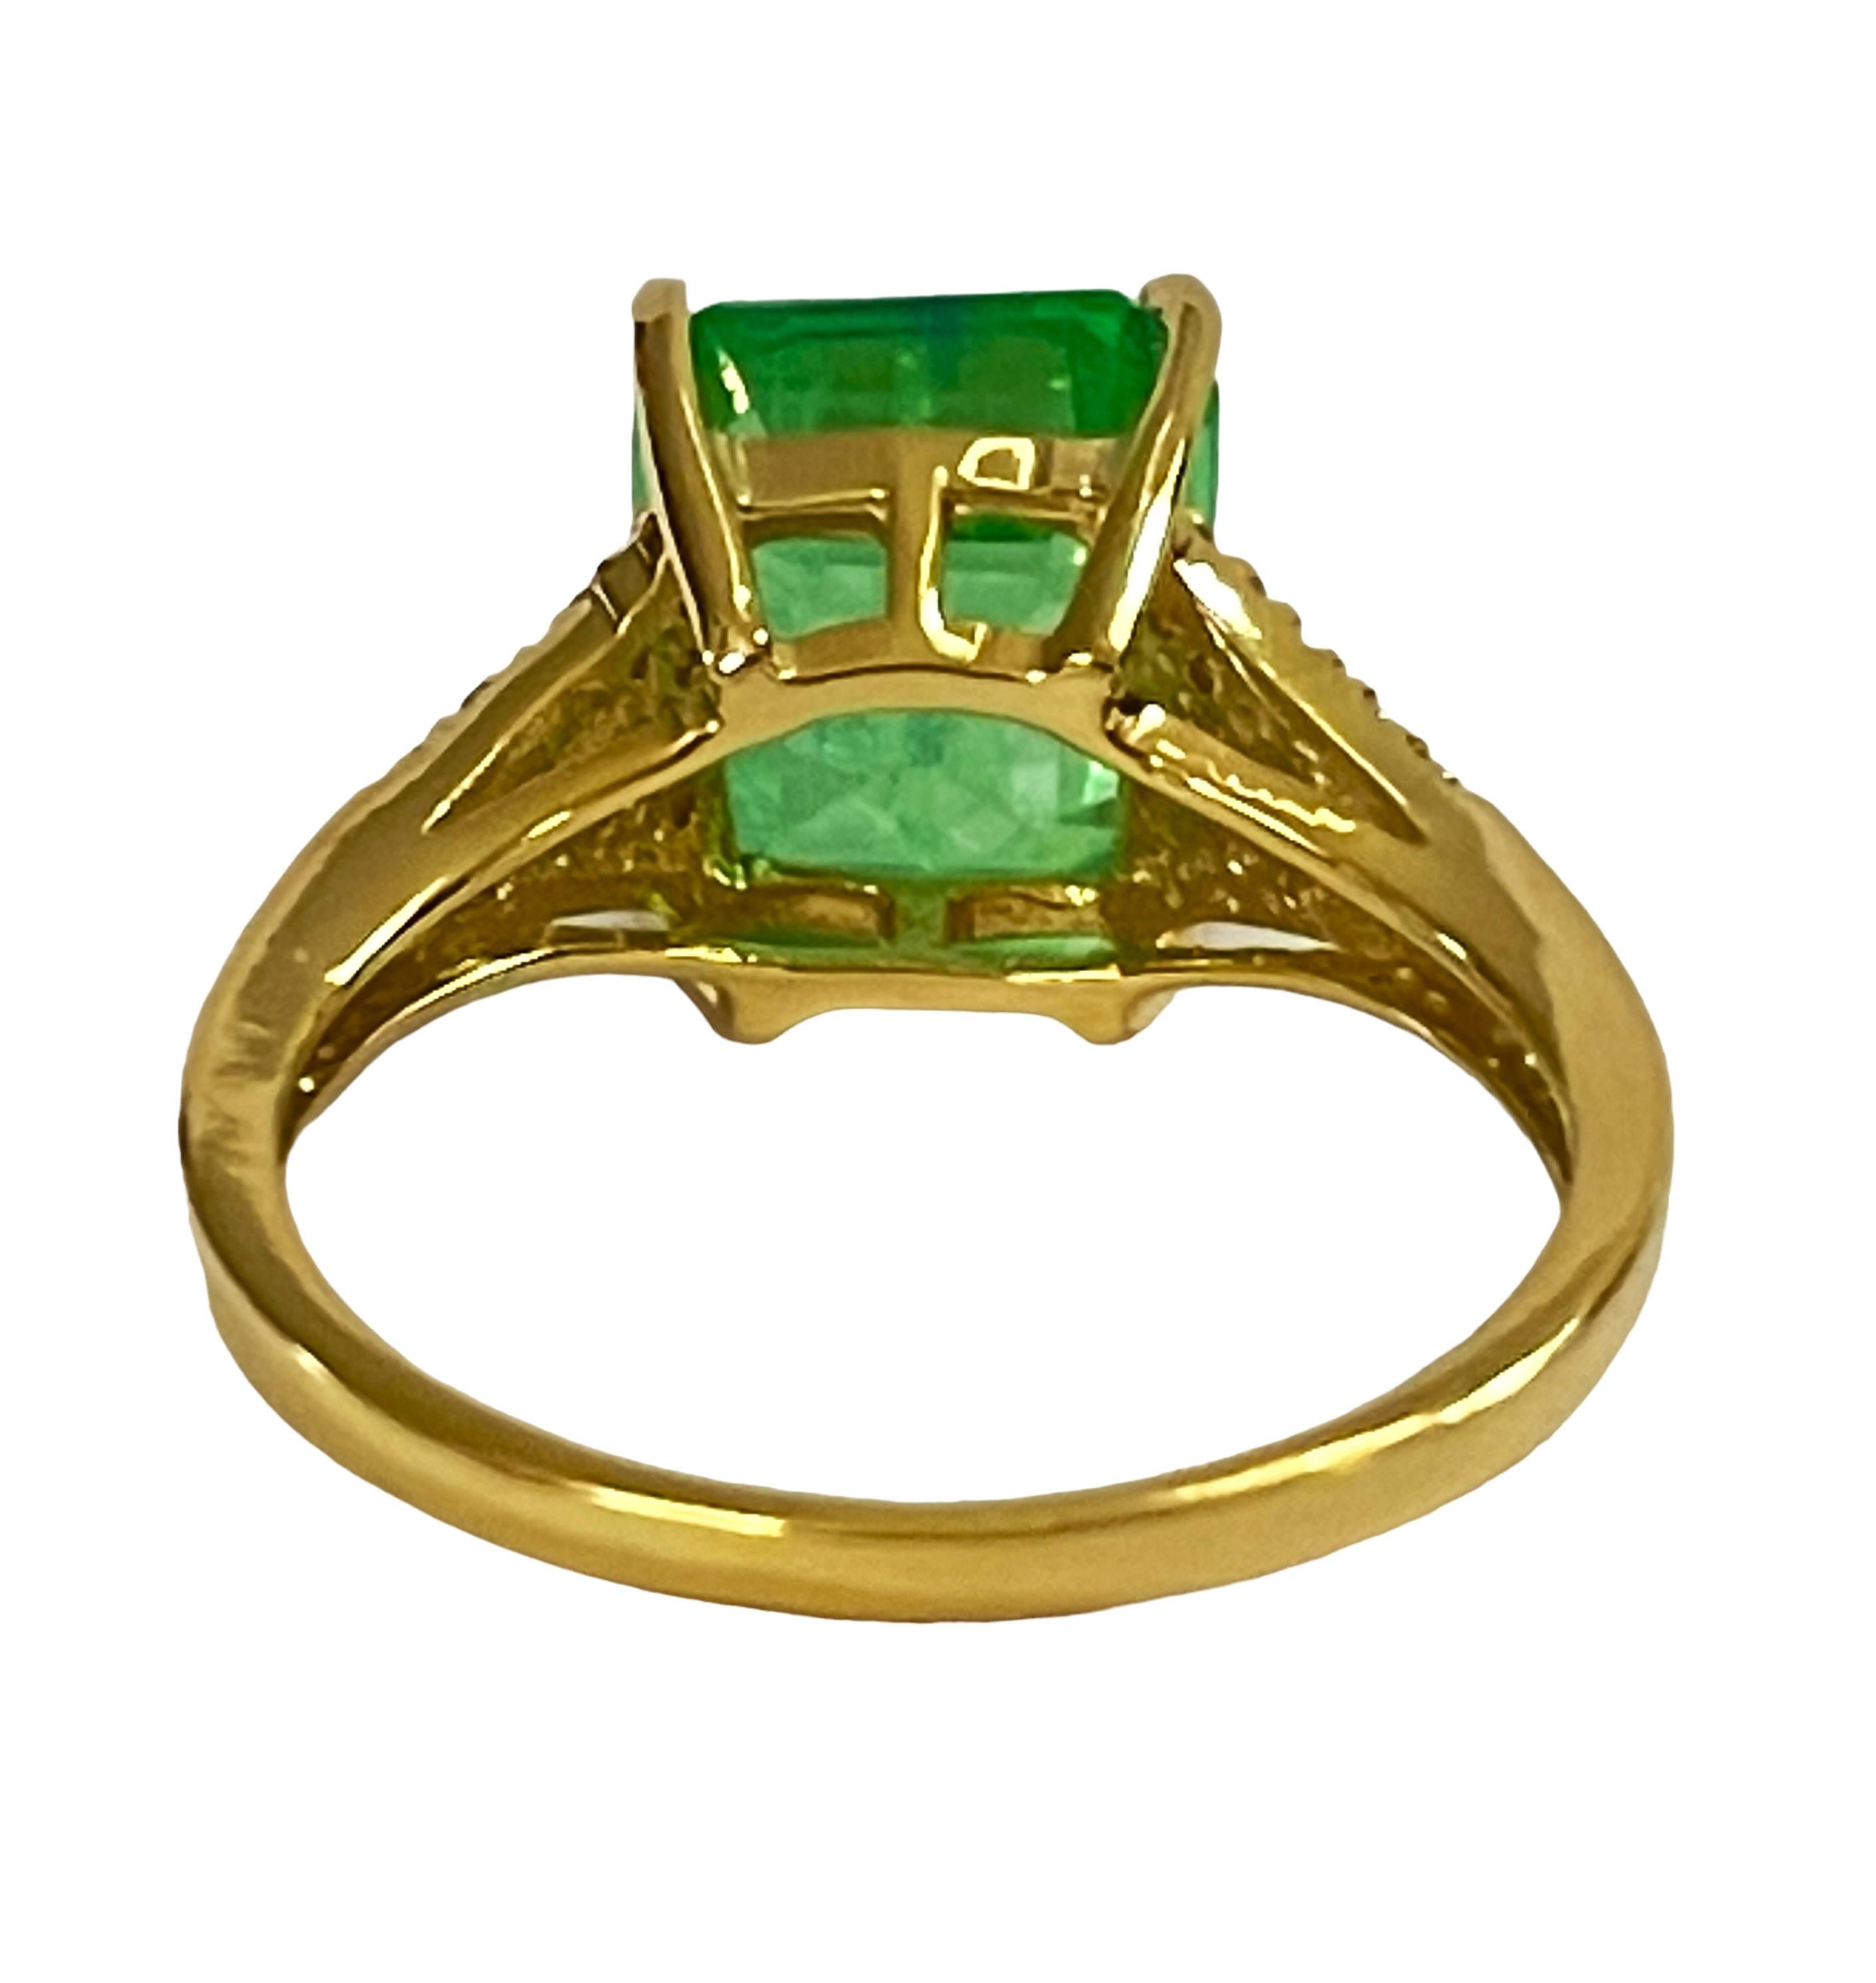 Oval Cut New African 5.40 Carat Emerald Green Garnet Sapphire YGold Sterling Ring For Sale